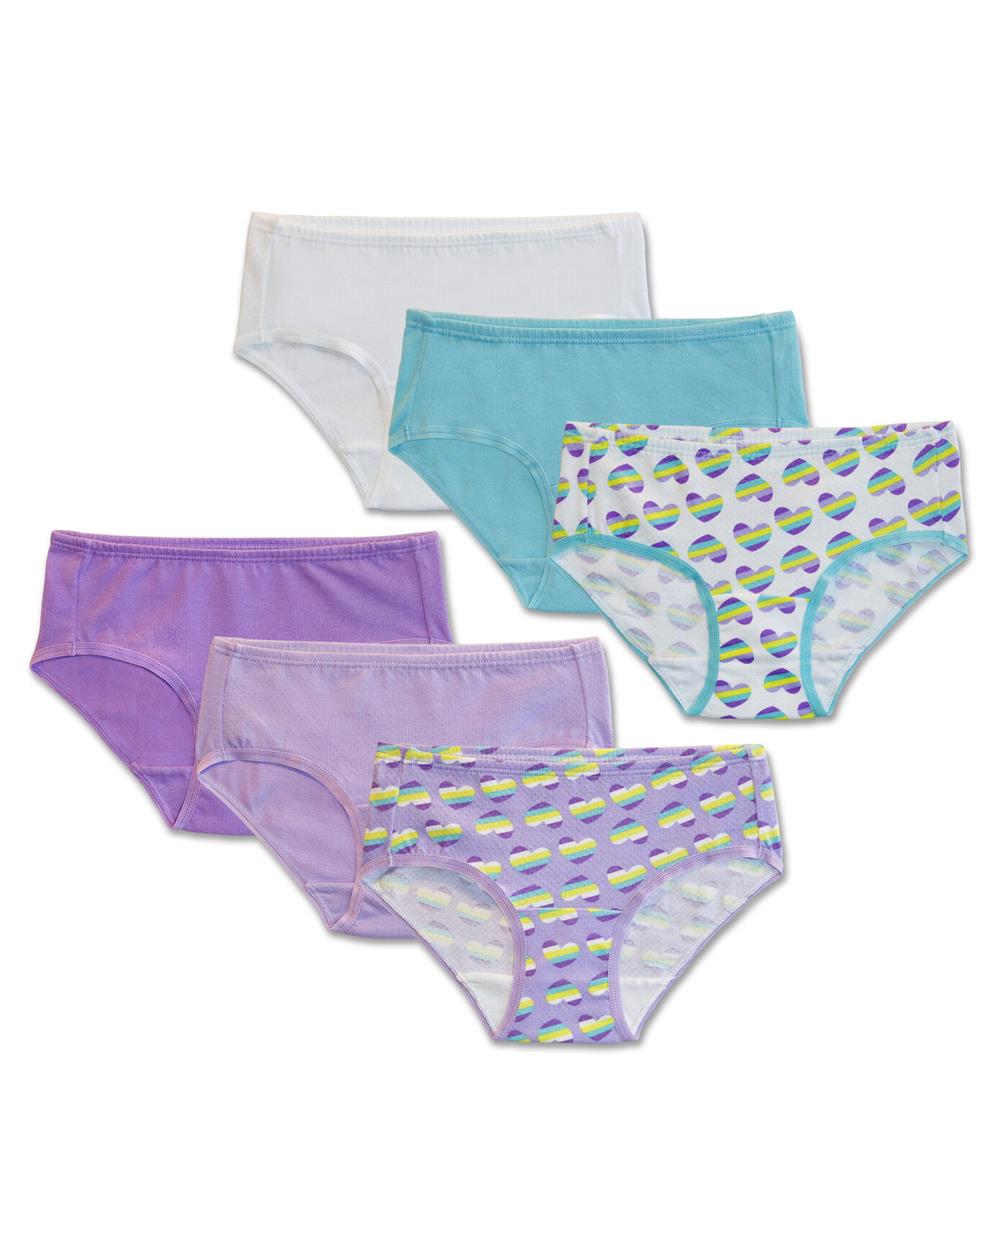 Fruit Of The Loom Girls Cotton Hipster Underwear 10 Pack, 10, Assorted 